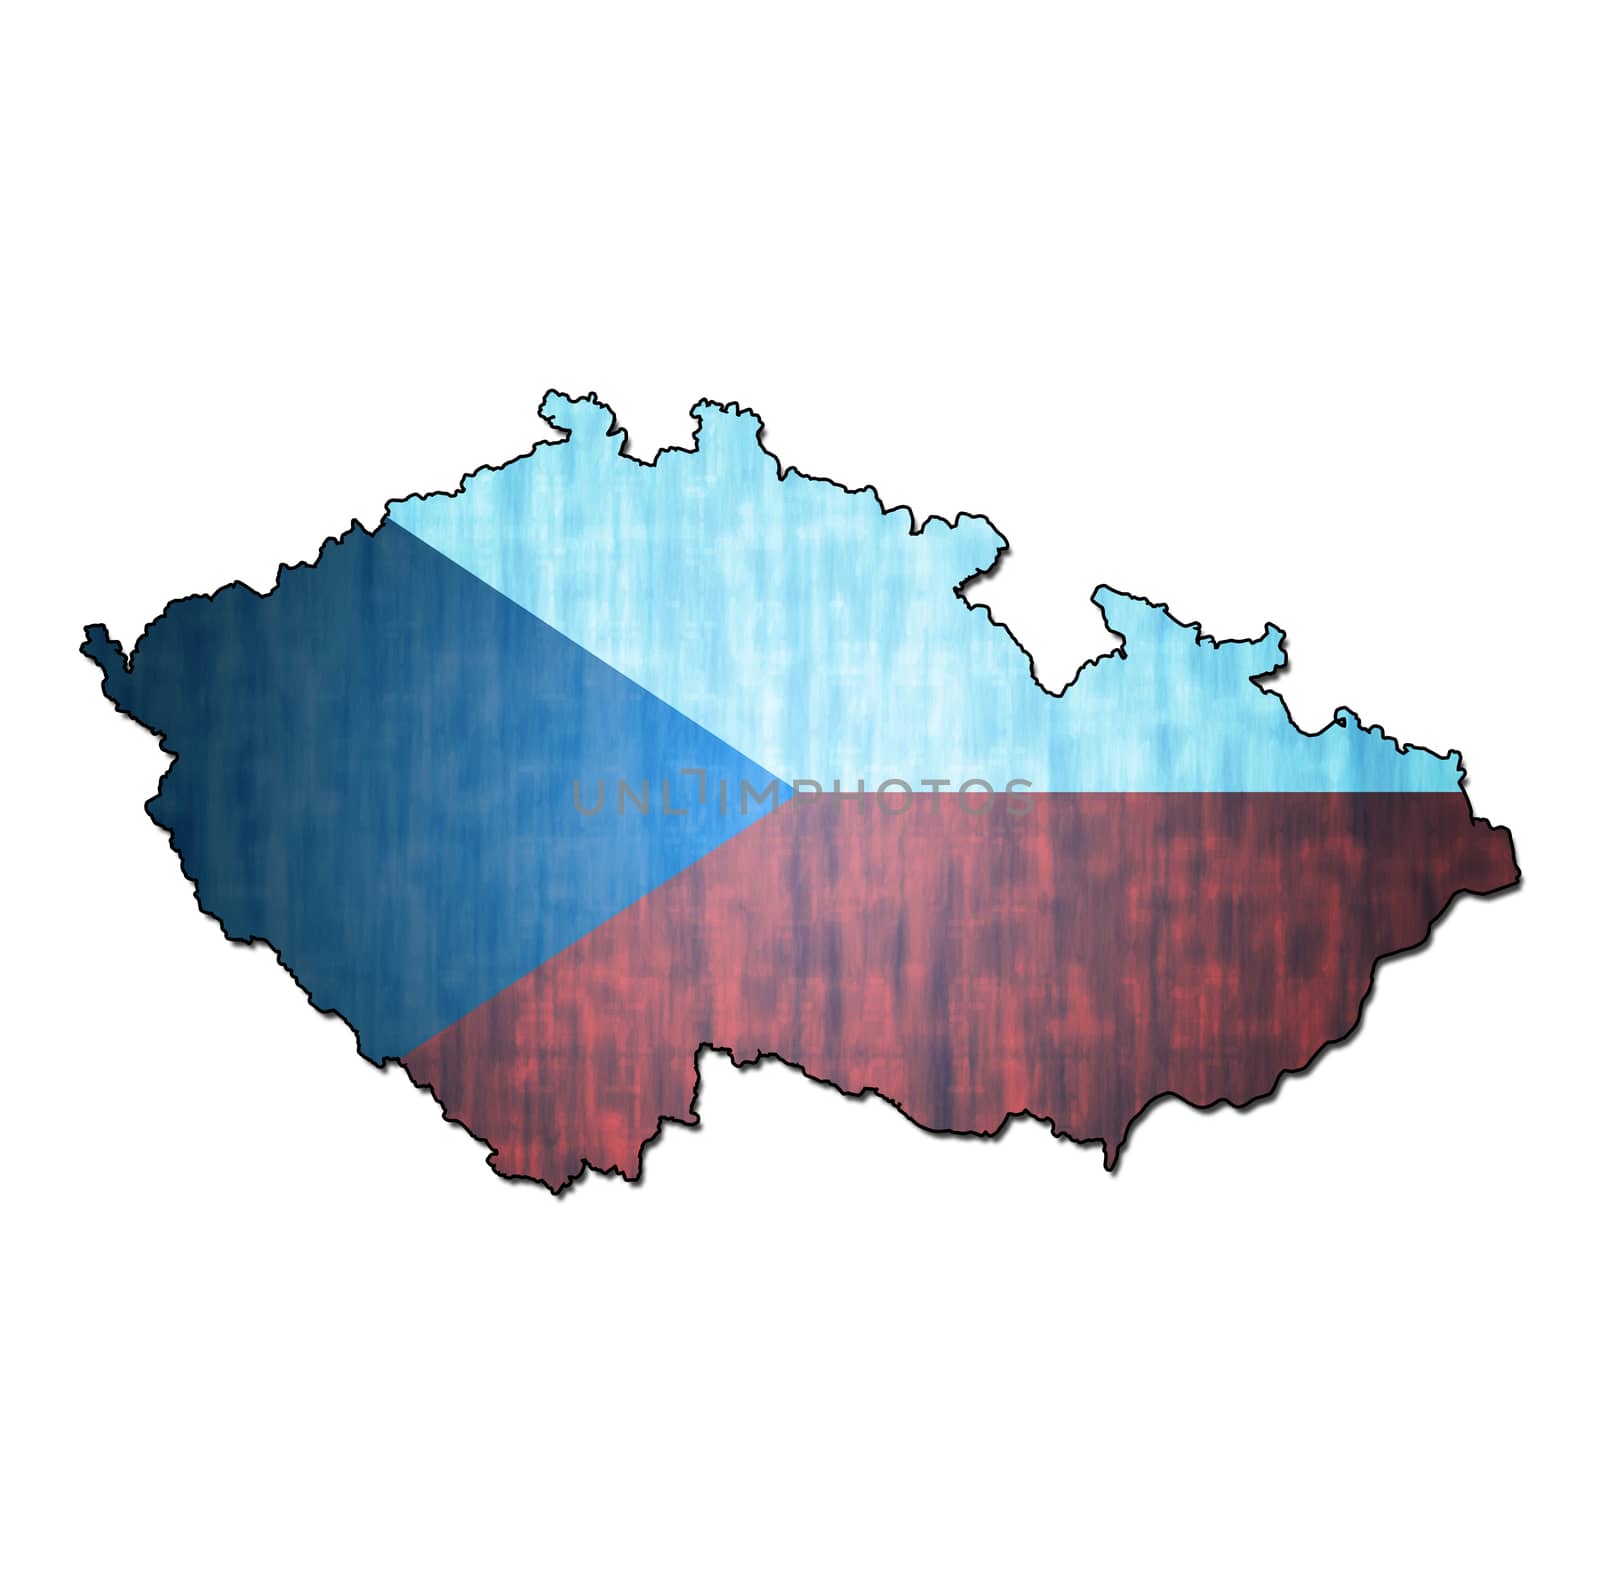 czechoslovakia territory with flag by michal812